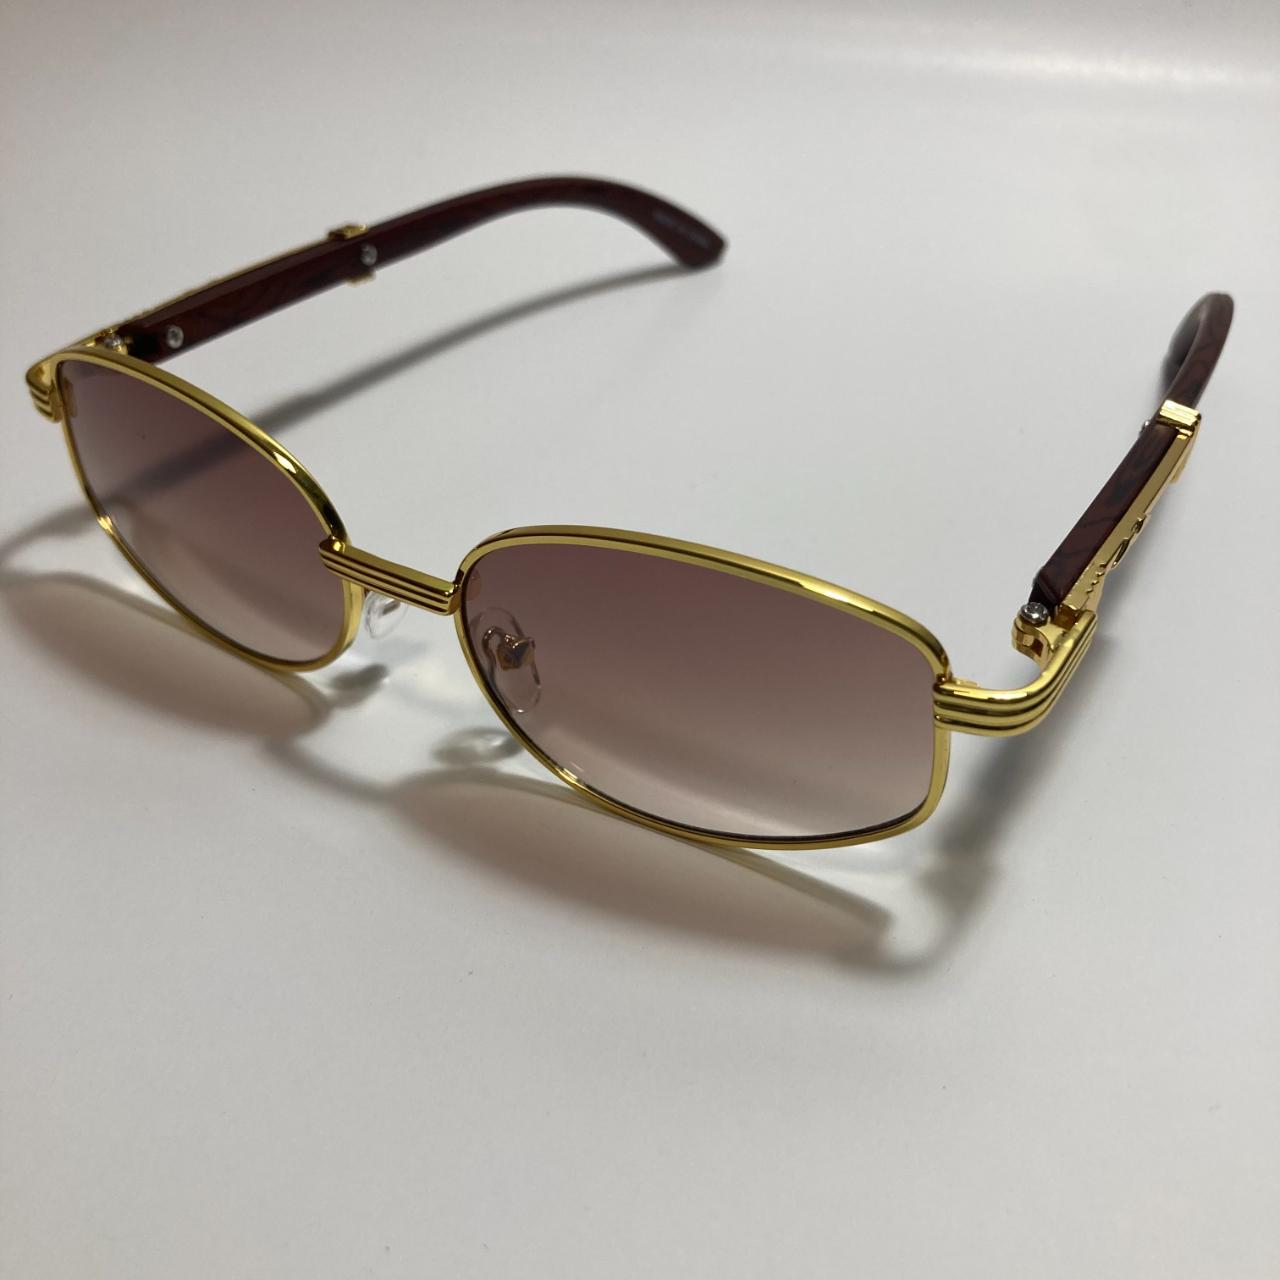 Men's Gold and Brown Sunglasses